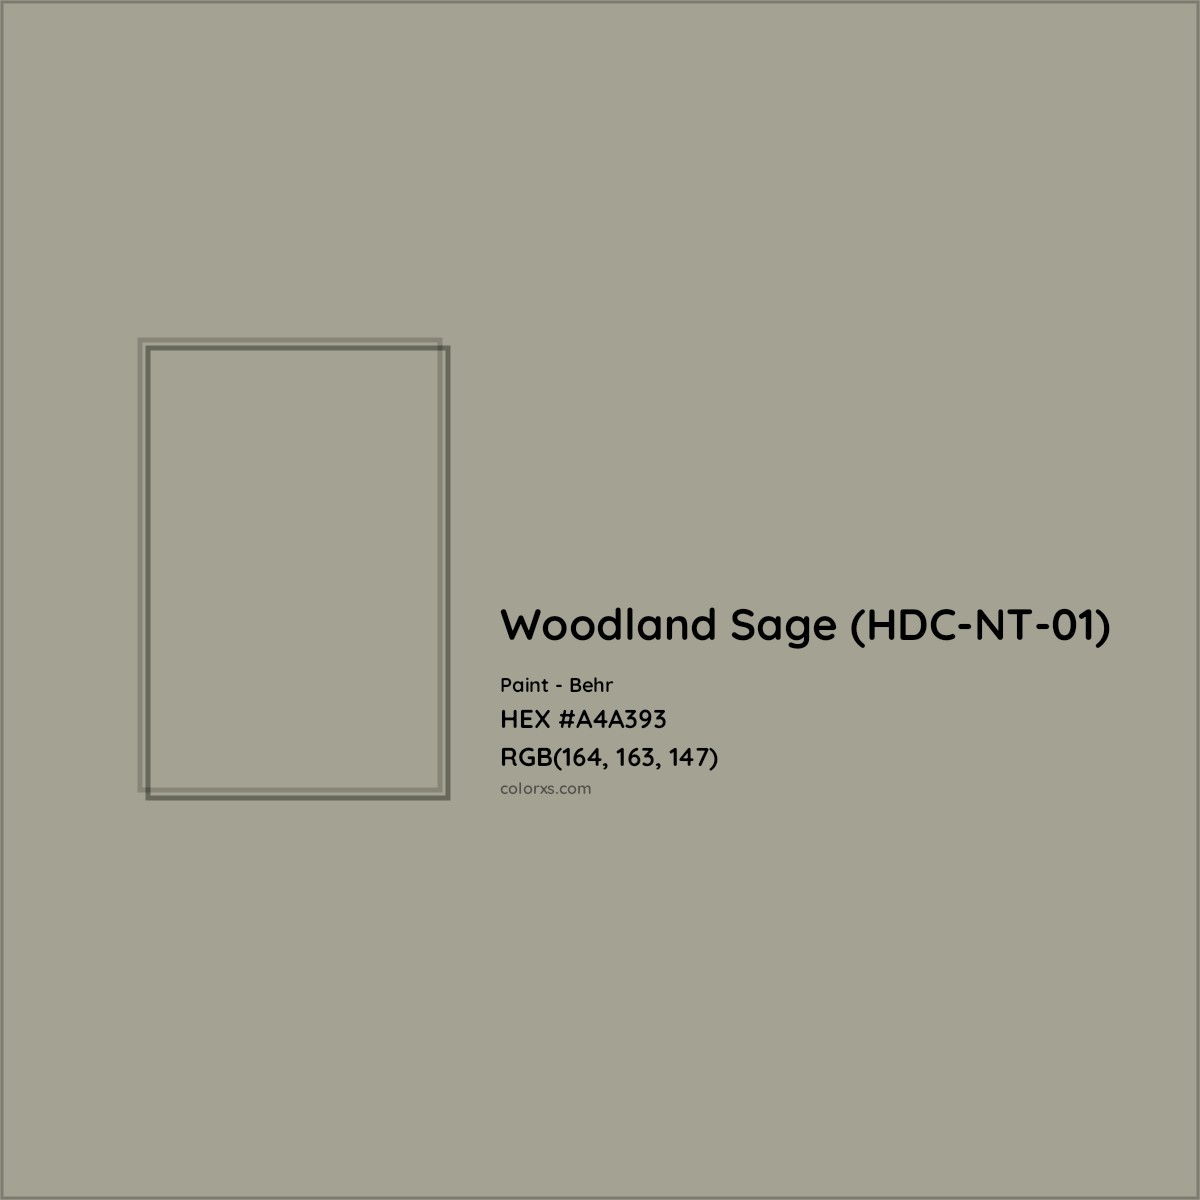 HEX #A4A393 Woodland Sage (HDC-NT-01) Paint Behr - Color Code